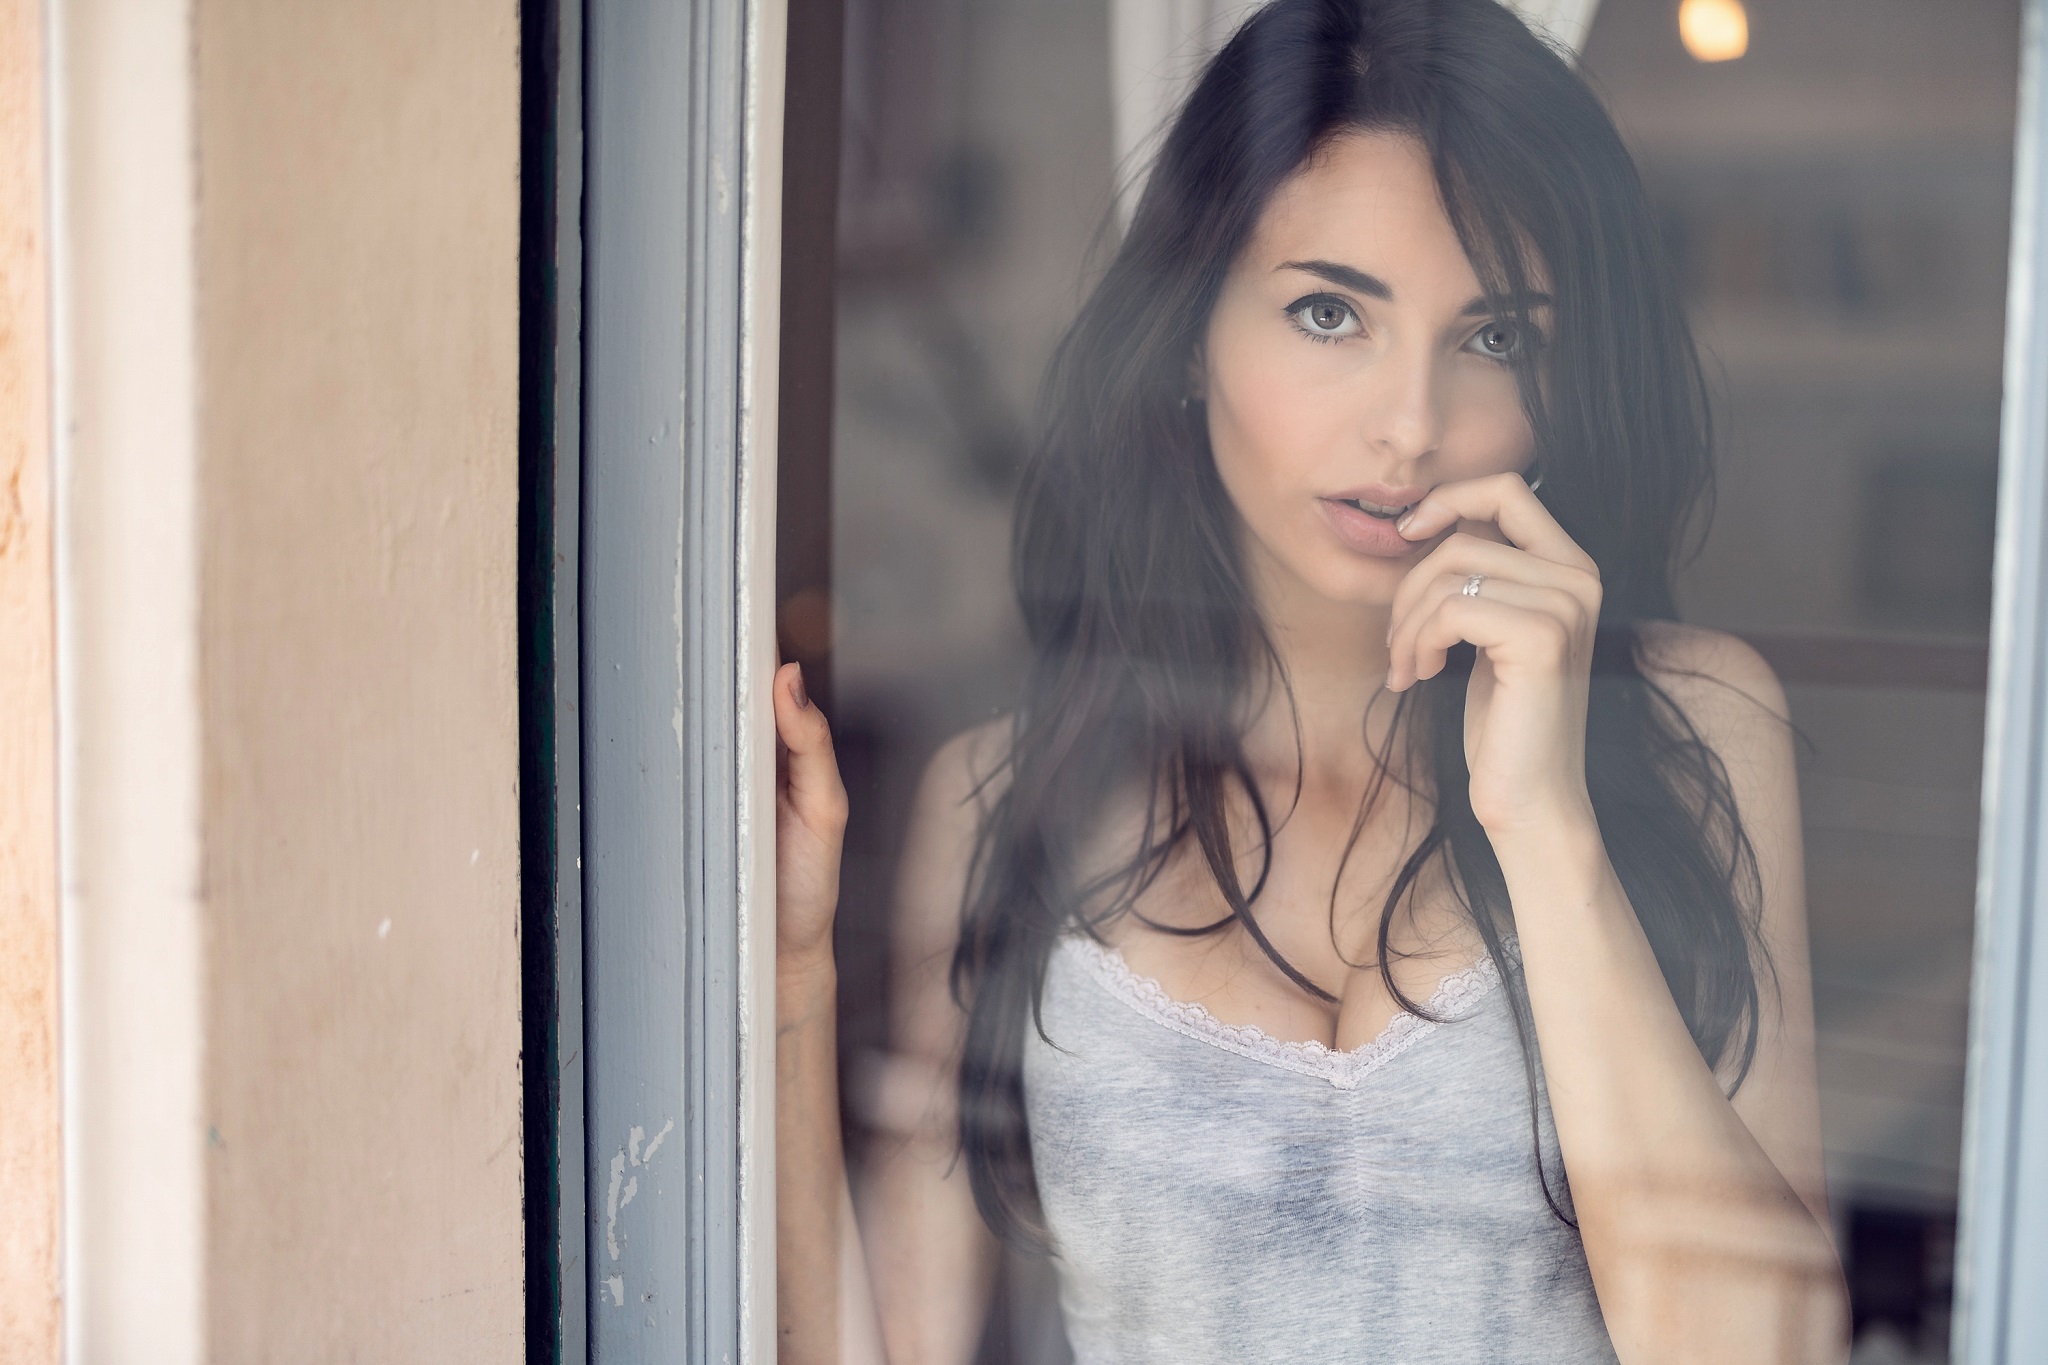 People 2048x1365 Luigi Malanetto women model looking at viewer tank top finger on lips cleavage long hair women indoors looking out window black hair dark hair Nicole Pasquale by the window one arm up